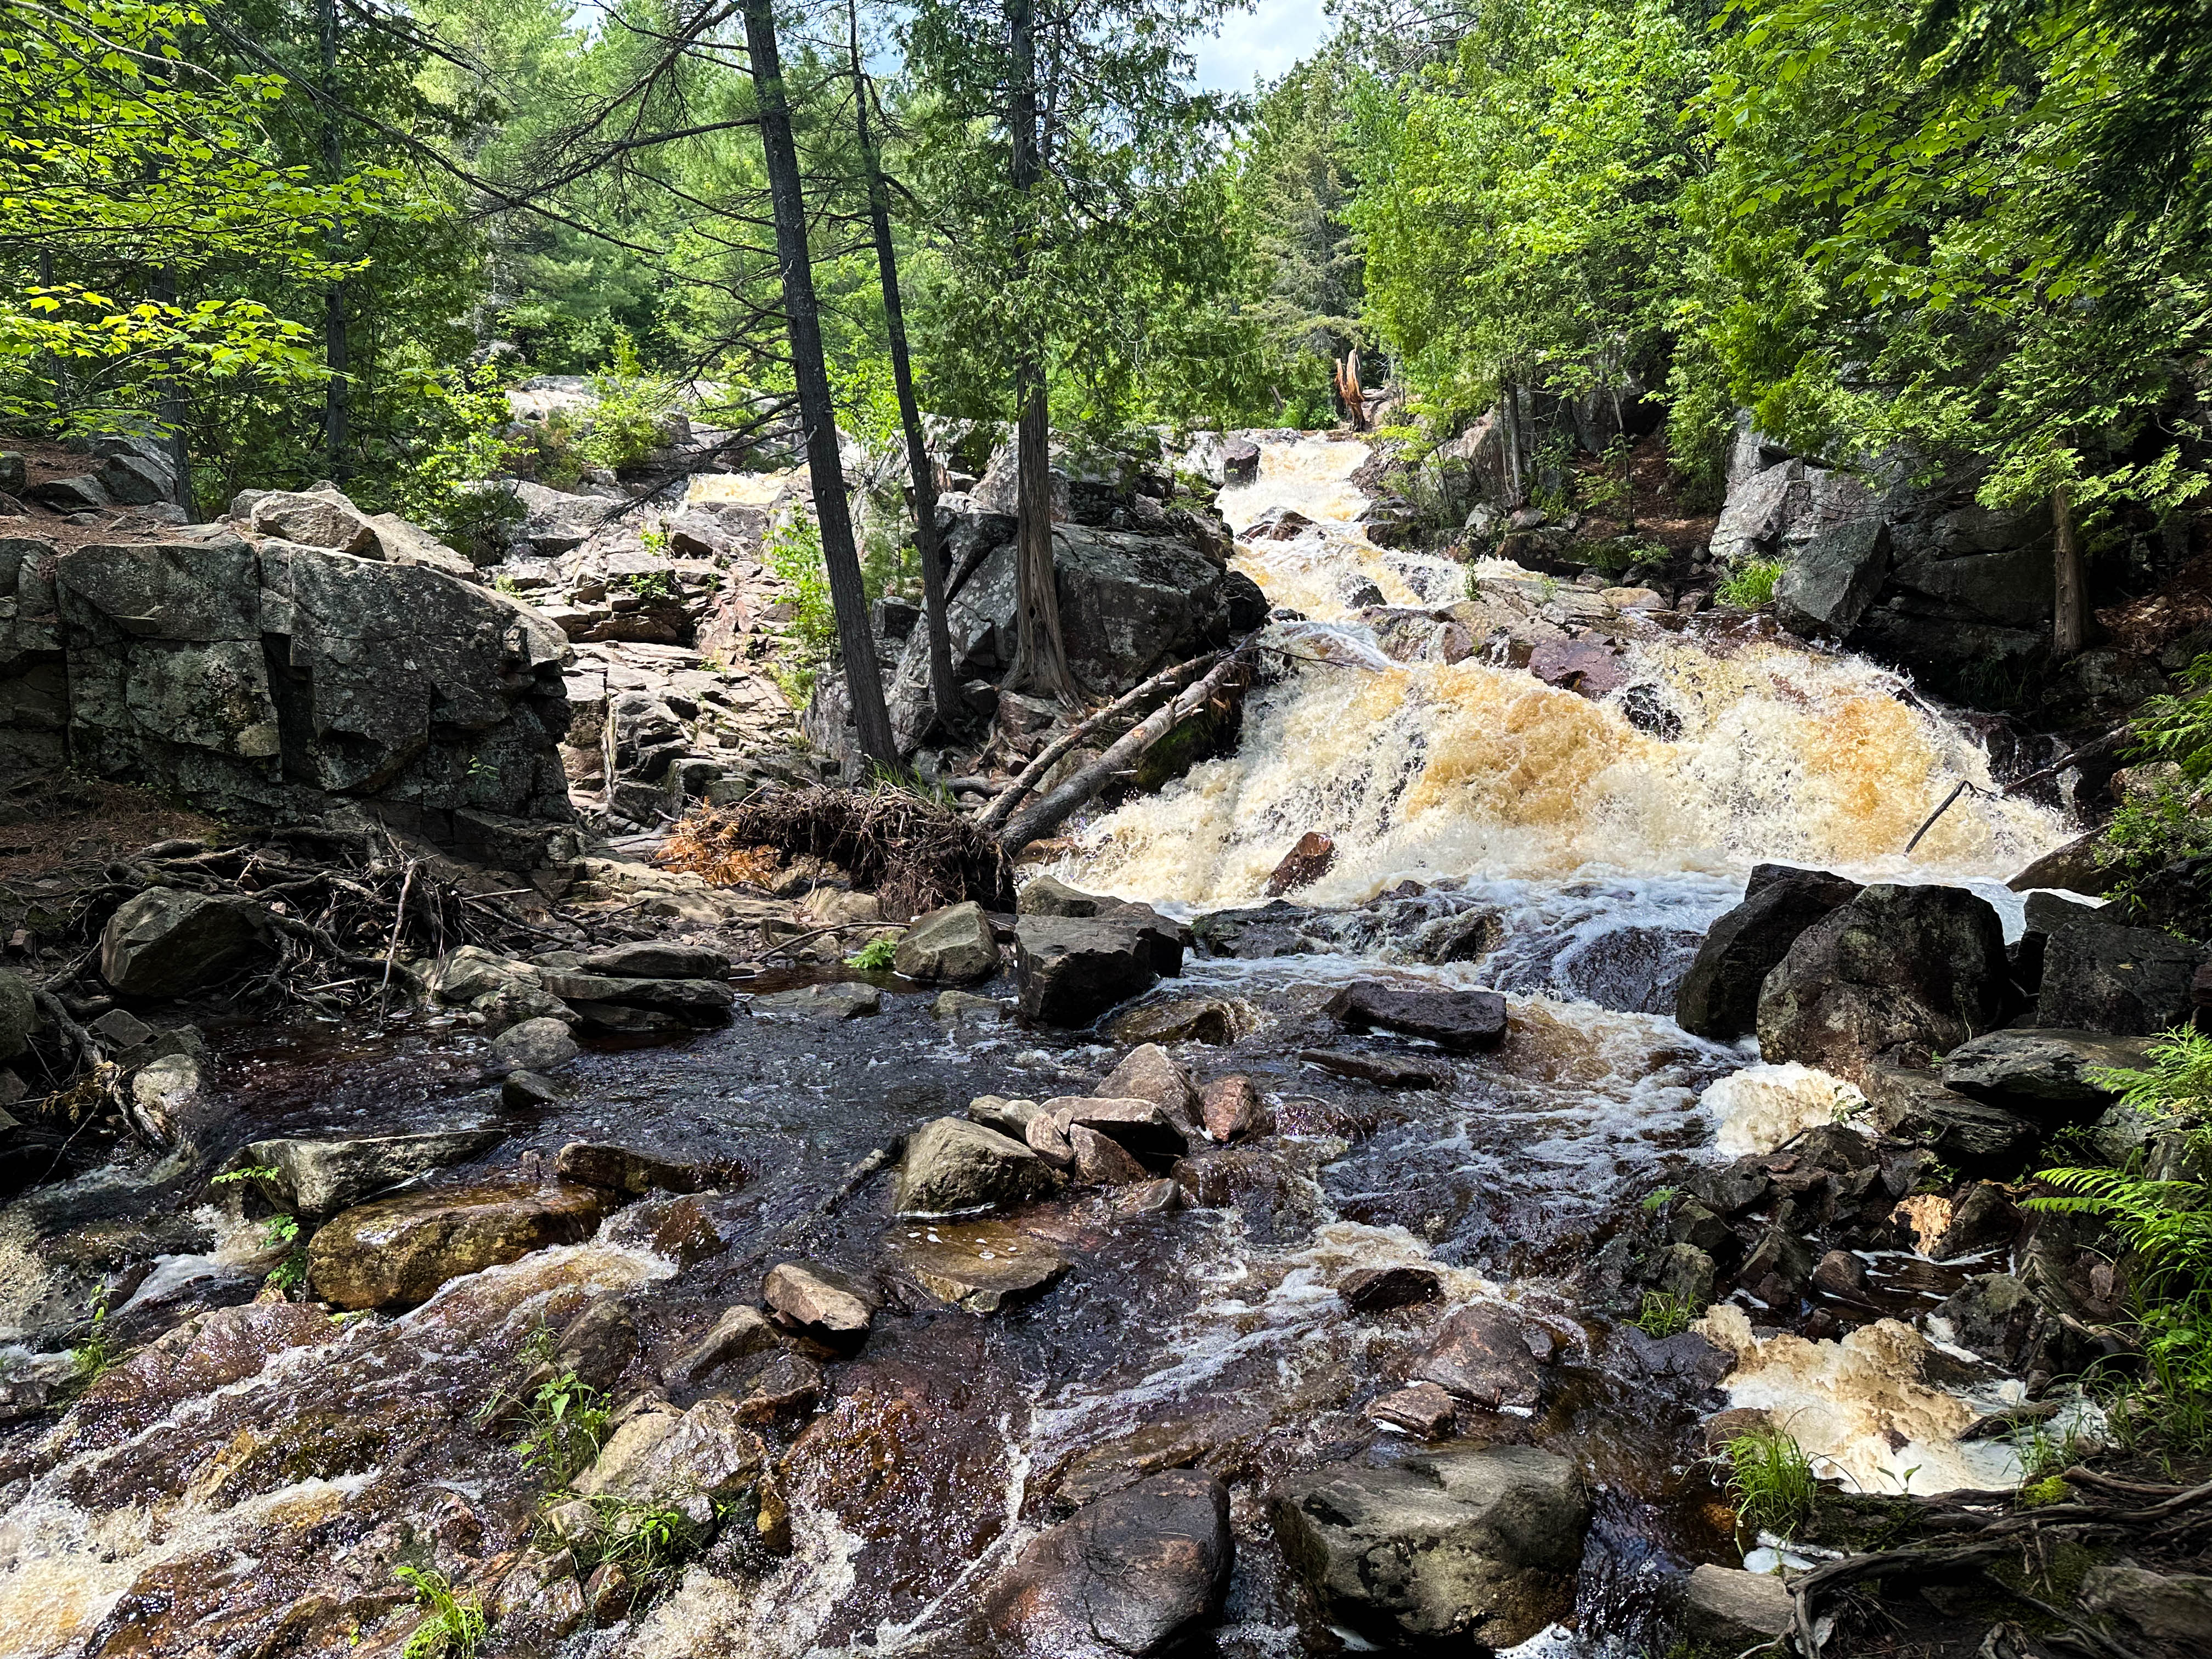 Duchesnay Falls; a low, bubbling waterfall along a bouldered riverbed in a thick green forest.